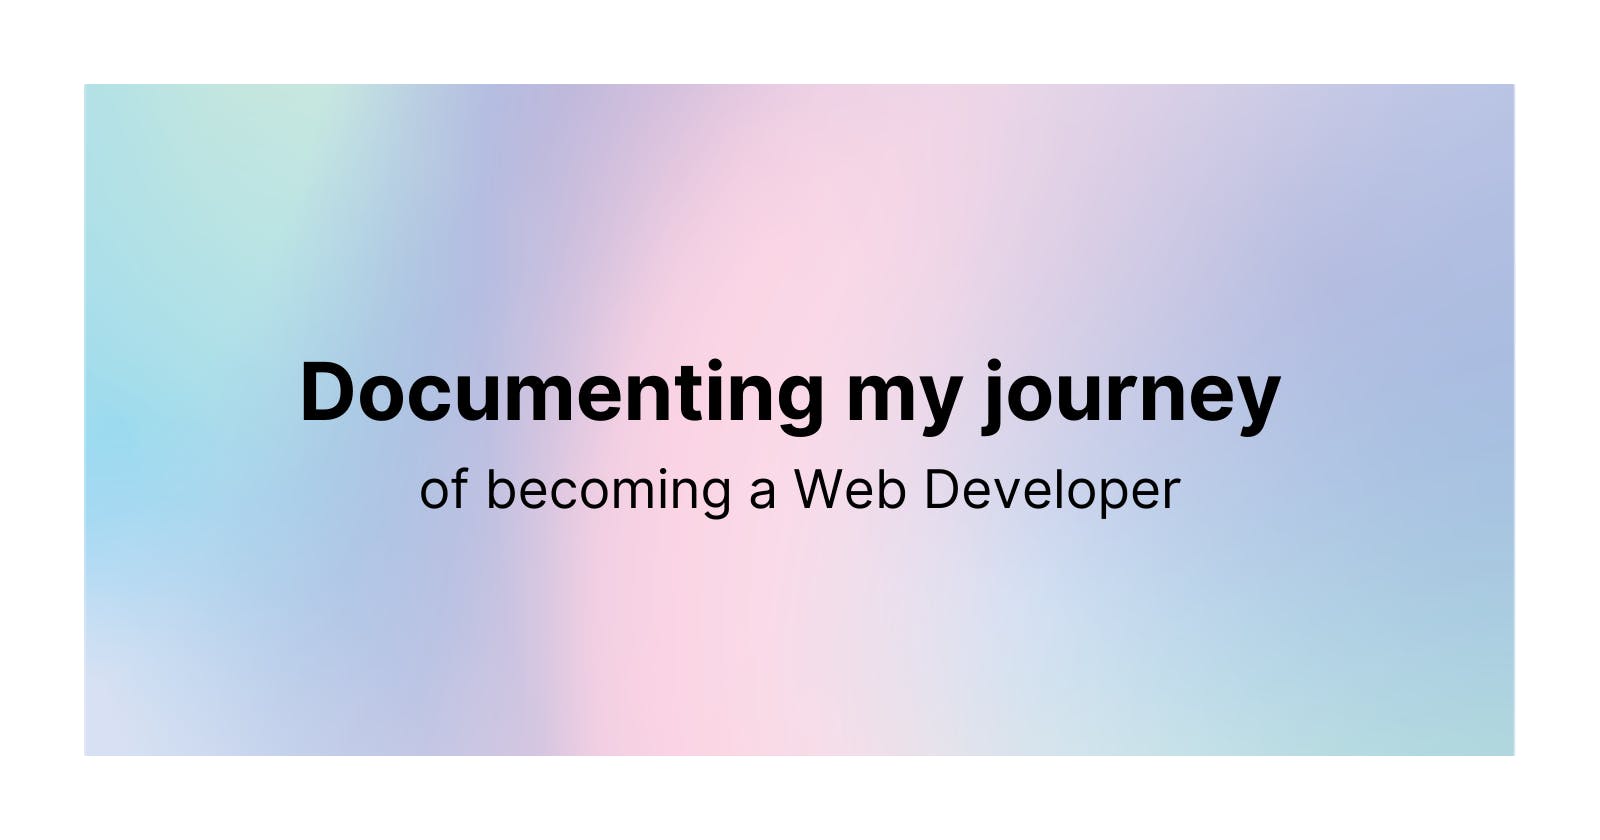 Day 5 and 6 of my Web Development Journey.